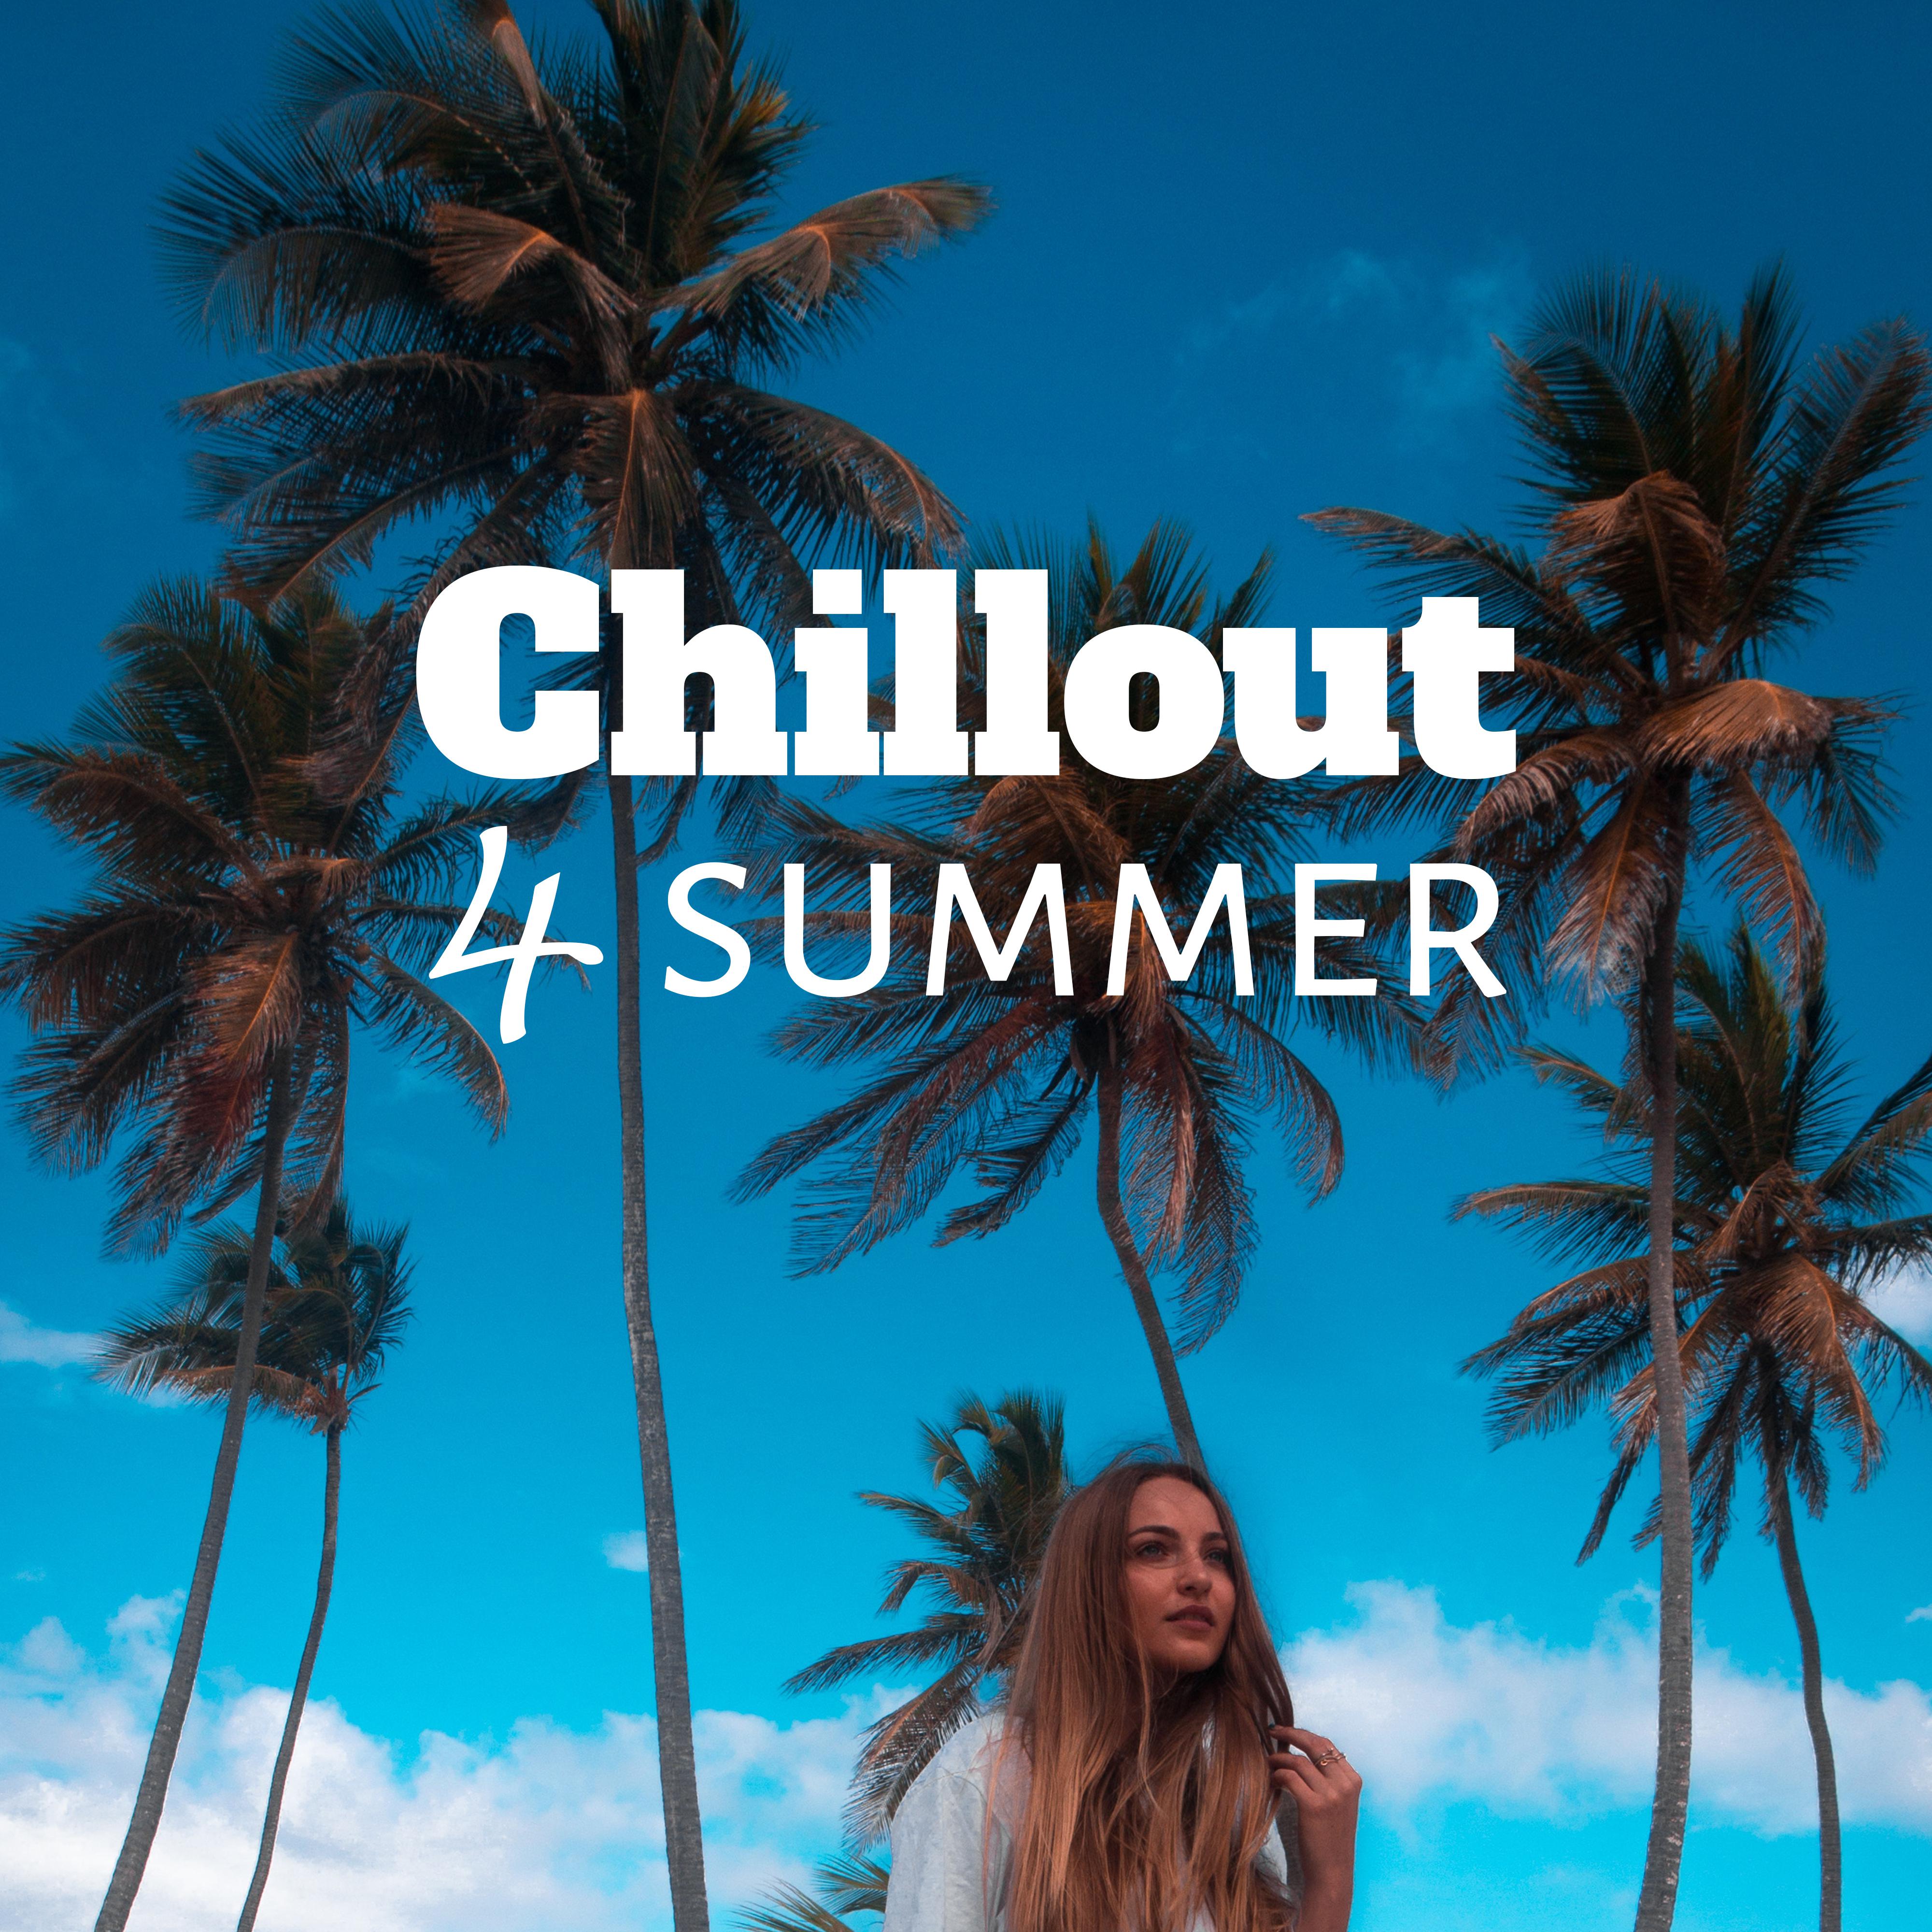 Chillout 4 Summer – Ibiza Lounge, Summer Hits, Deep Relax, **** Vibes, Chill Out 2019